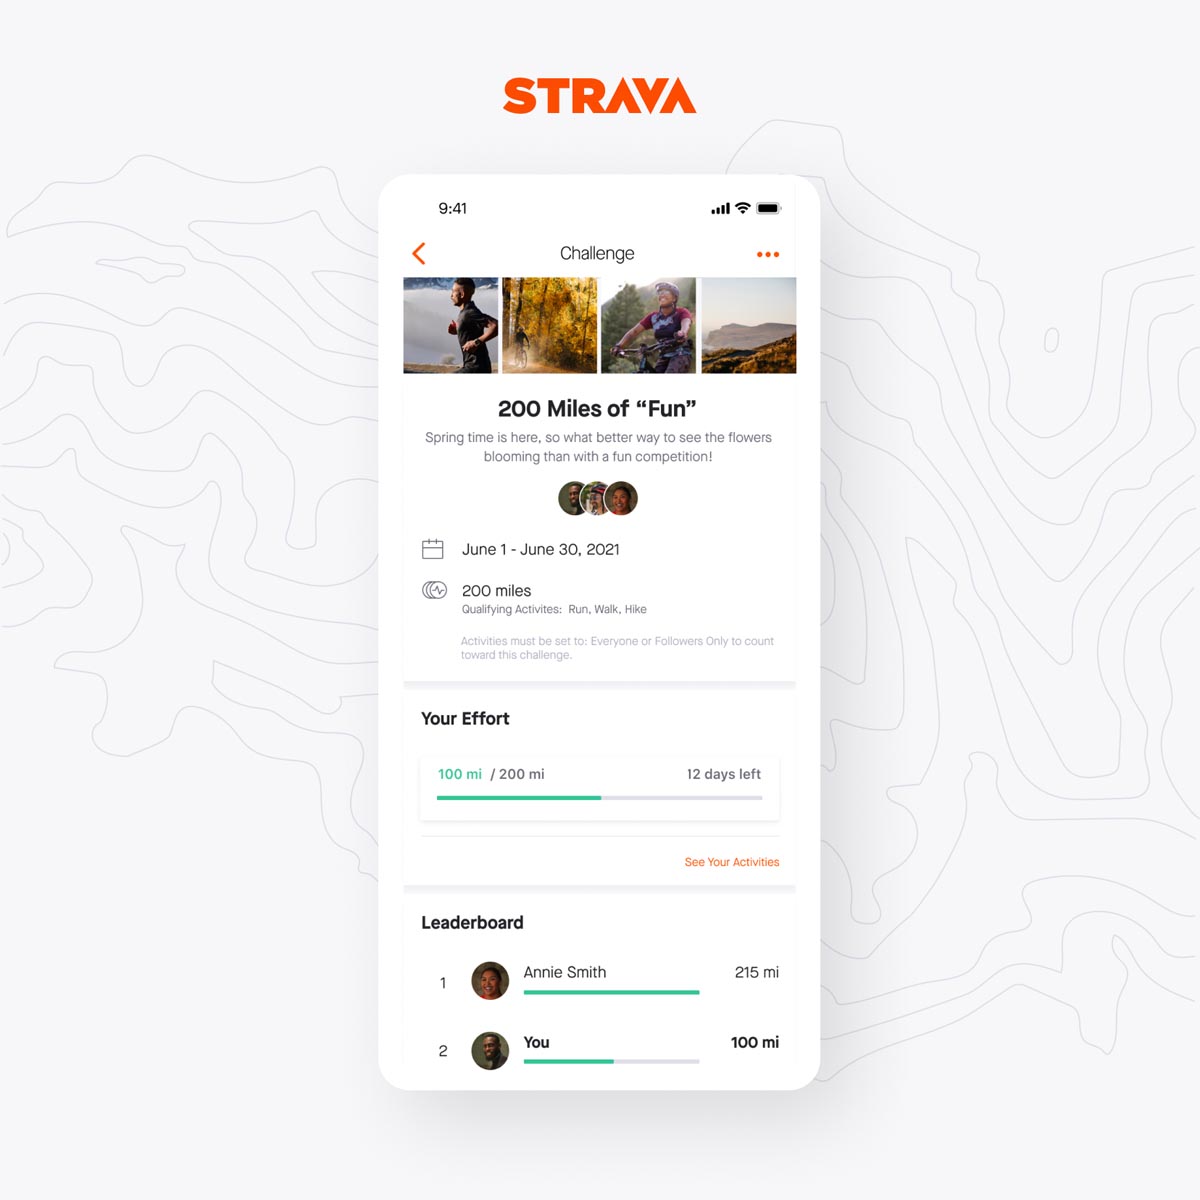 new routes & segments with Strava's latest app update